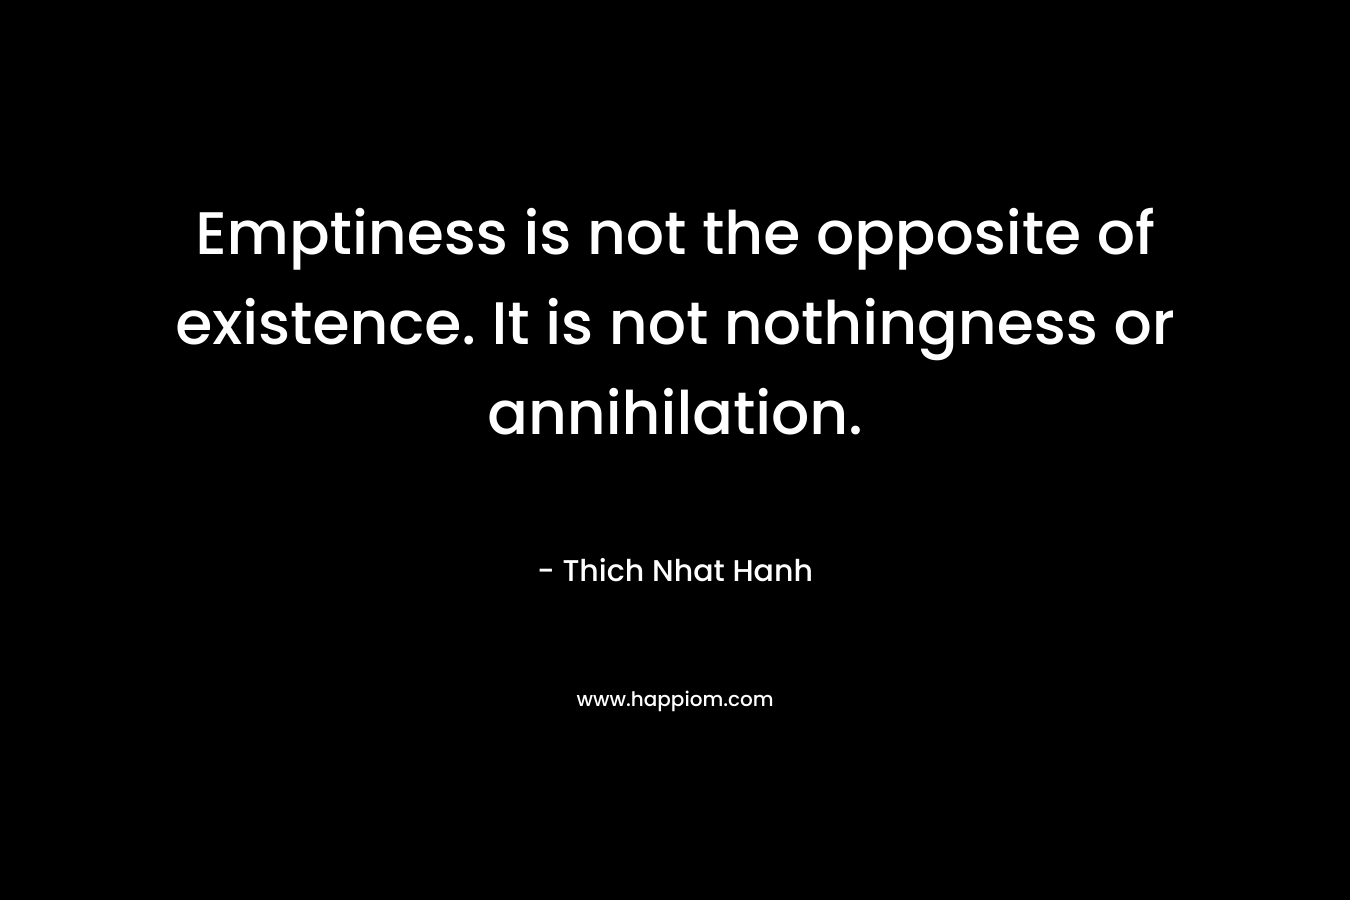 Emptiness is not the opposite of existence. It is not nothingness or annihilation.